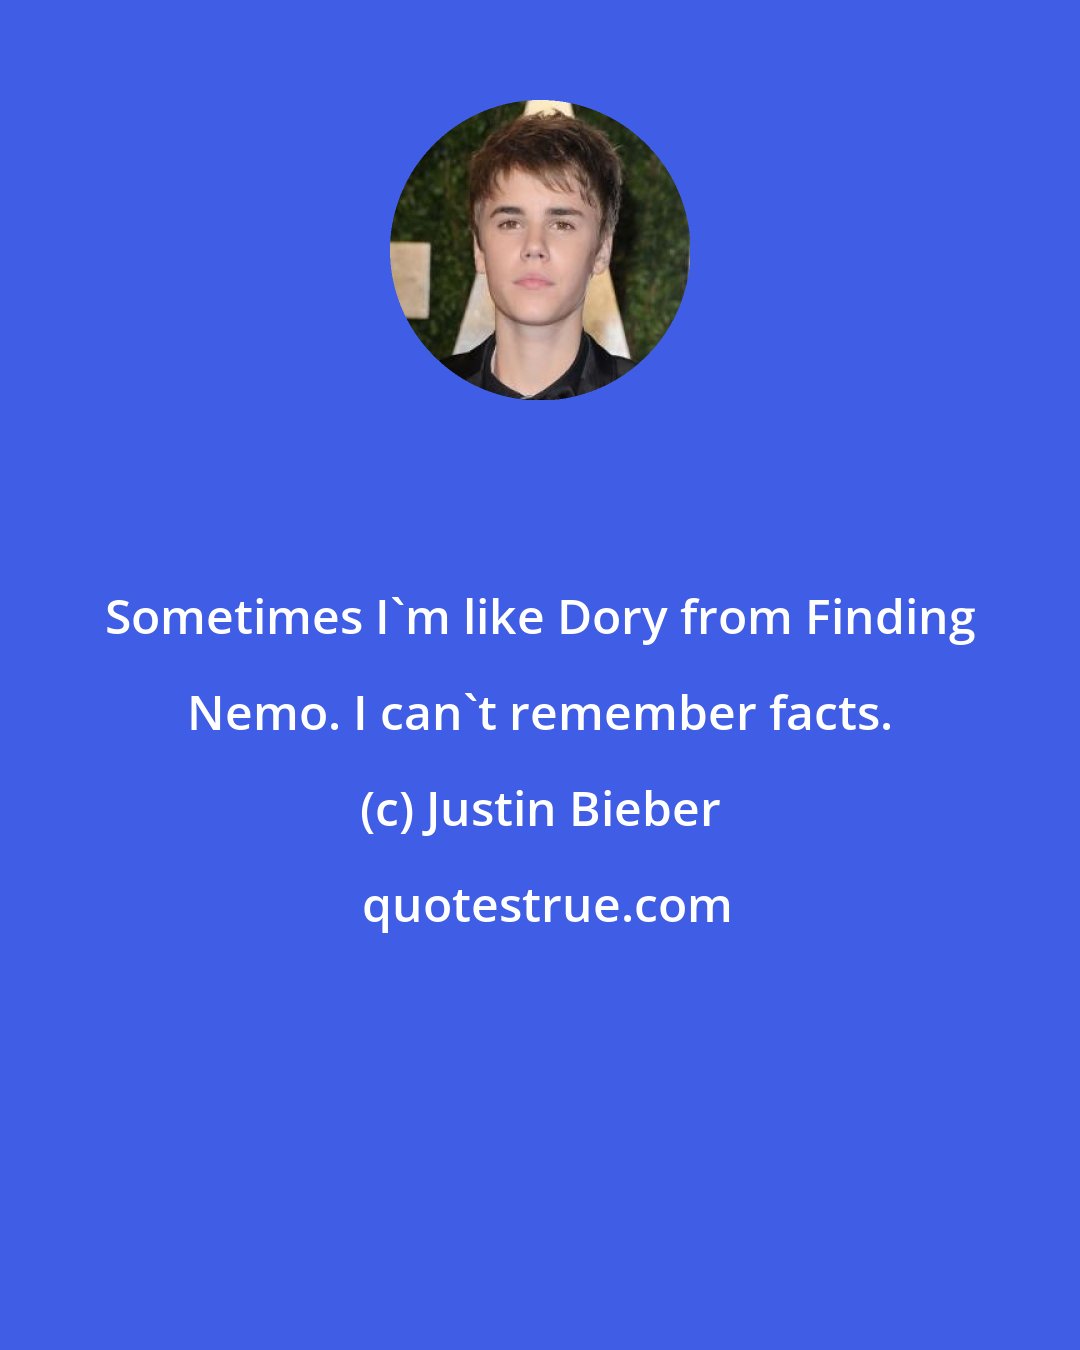 Justin Bieber: Sometimes I'm like Dory from Finding Nemo. I can't remember facts.